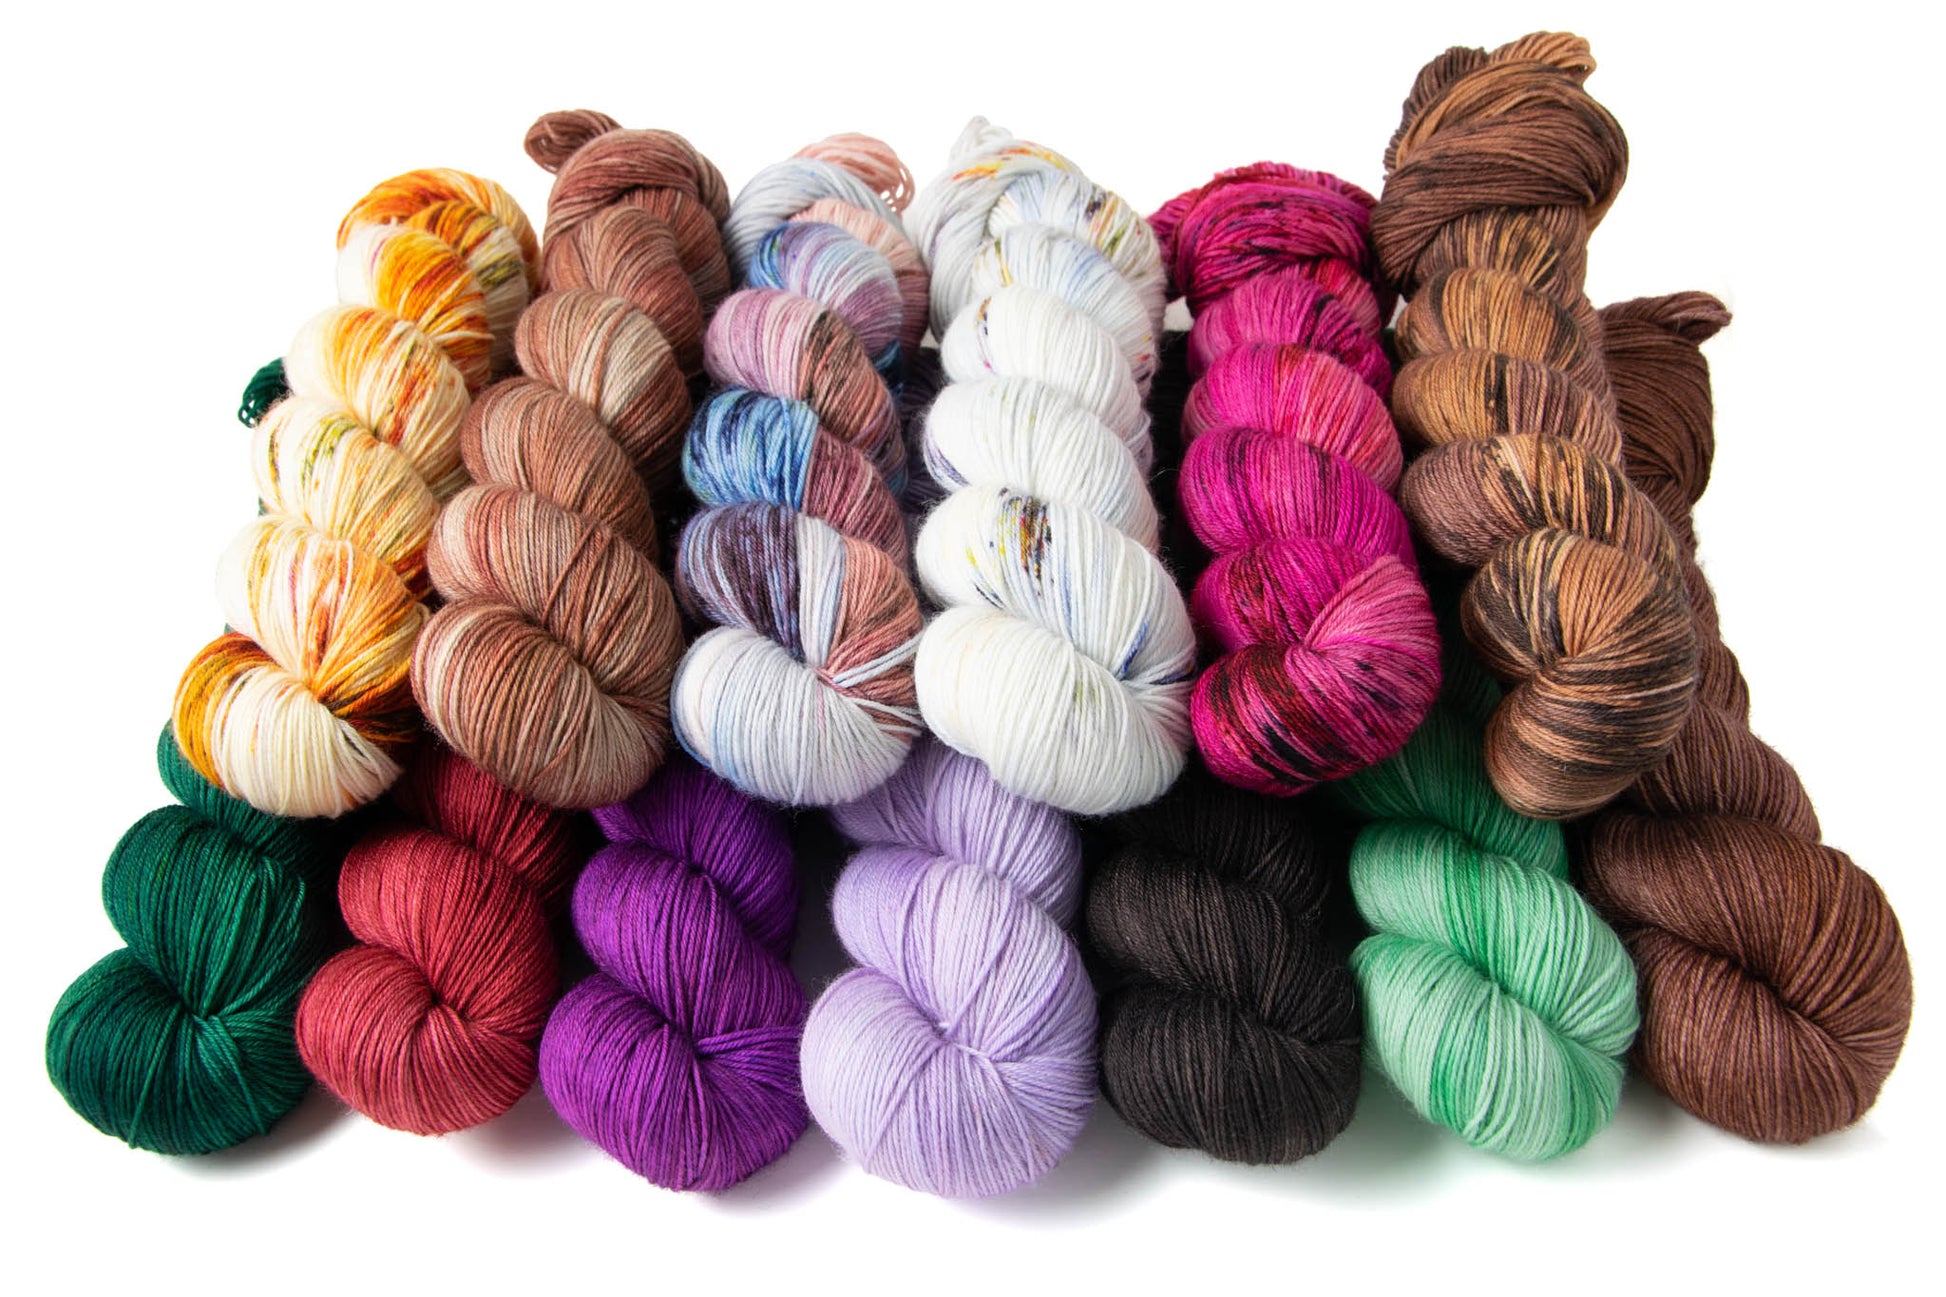 A stack of the thirteen colorways in the Cabin Collection: Craft Nook, Fireplace, Games Cabinet, Marbles, Fuchsia Flowers, Cabin Walls, Carpet, Comfy Cozy Couches, Purple Underpants, Creator of Beauty, Fixtures, Grandma's Pert, and Penny Pinecones.